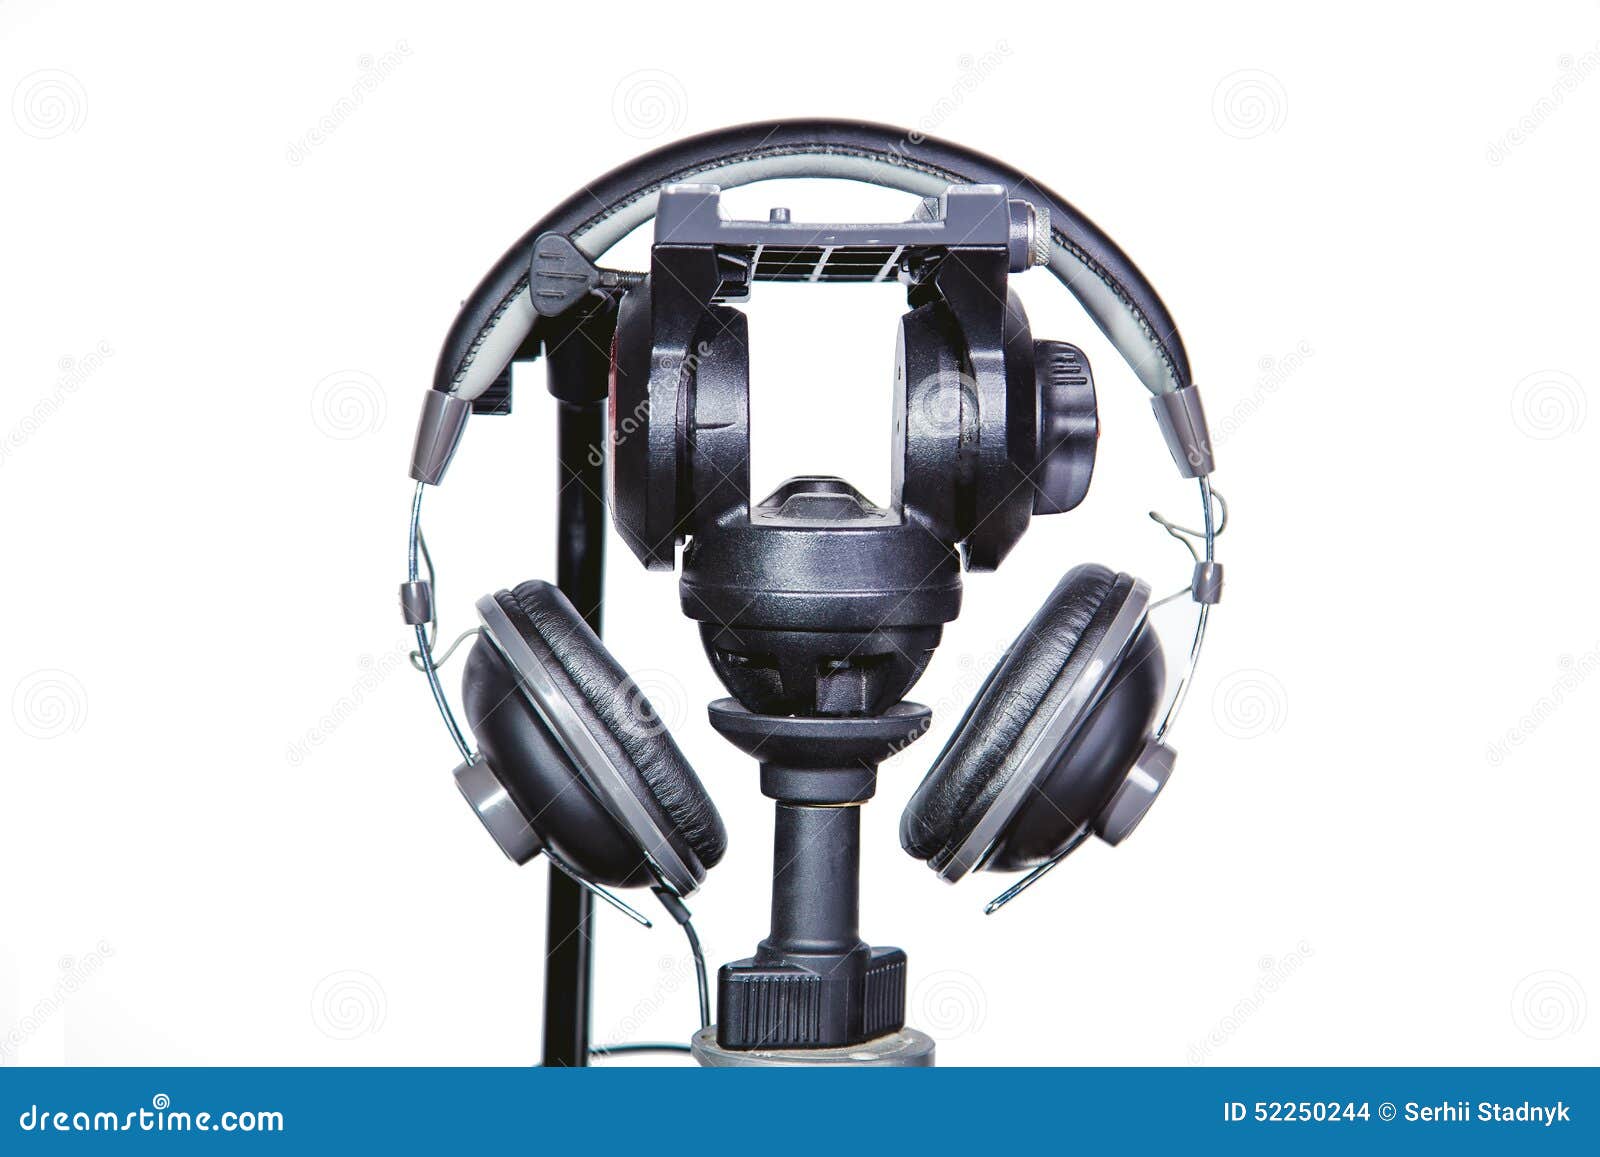 headphones and a tripod on a white background musica, audio reco